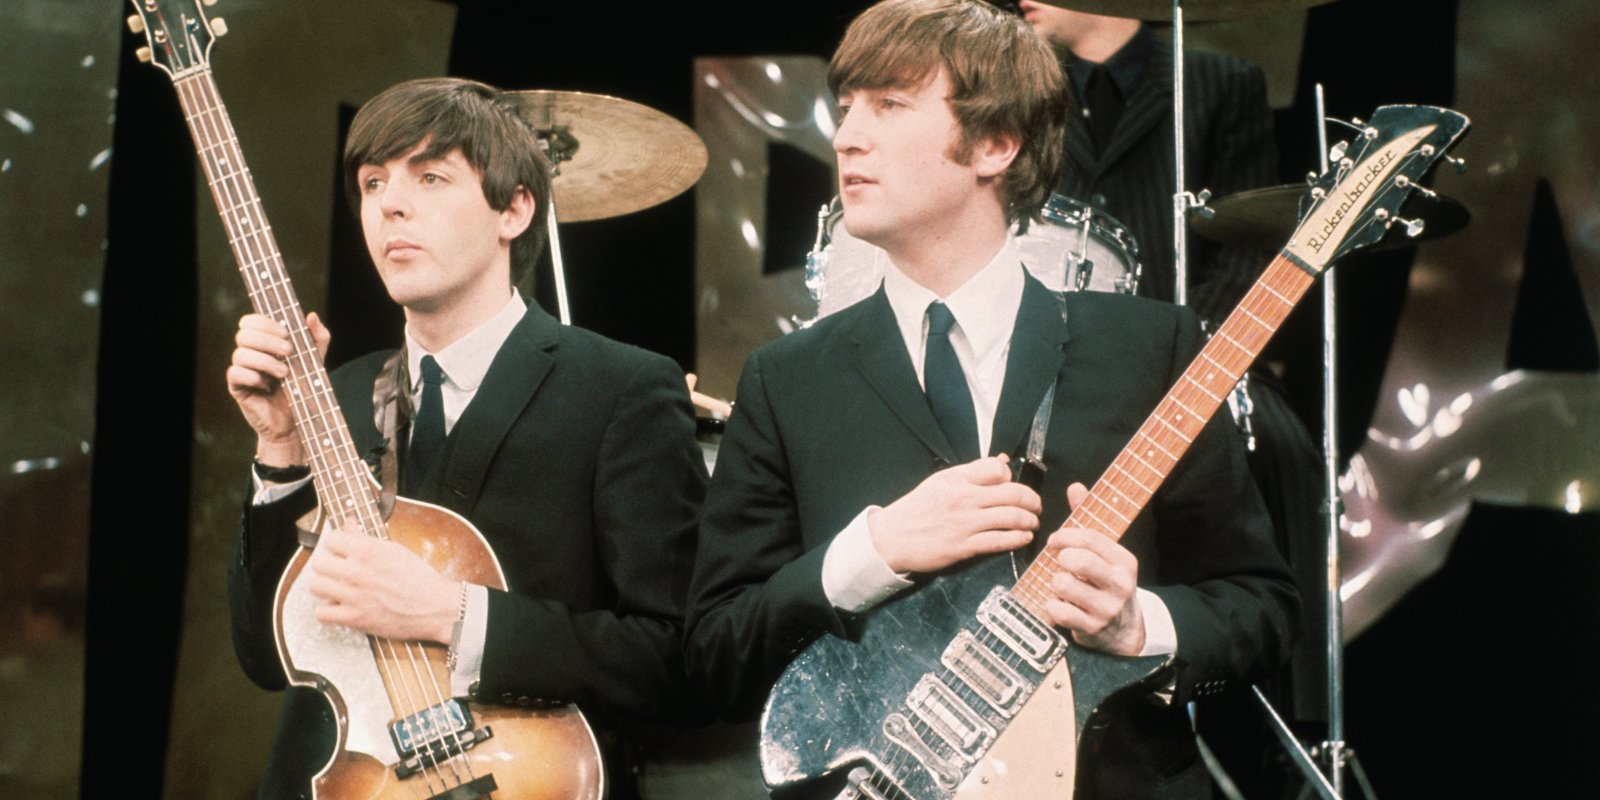 Paul McCartney and John Lennon pose together on stage with the members of The Beatles.